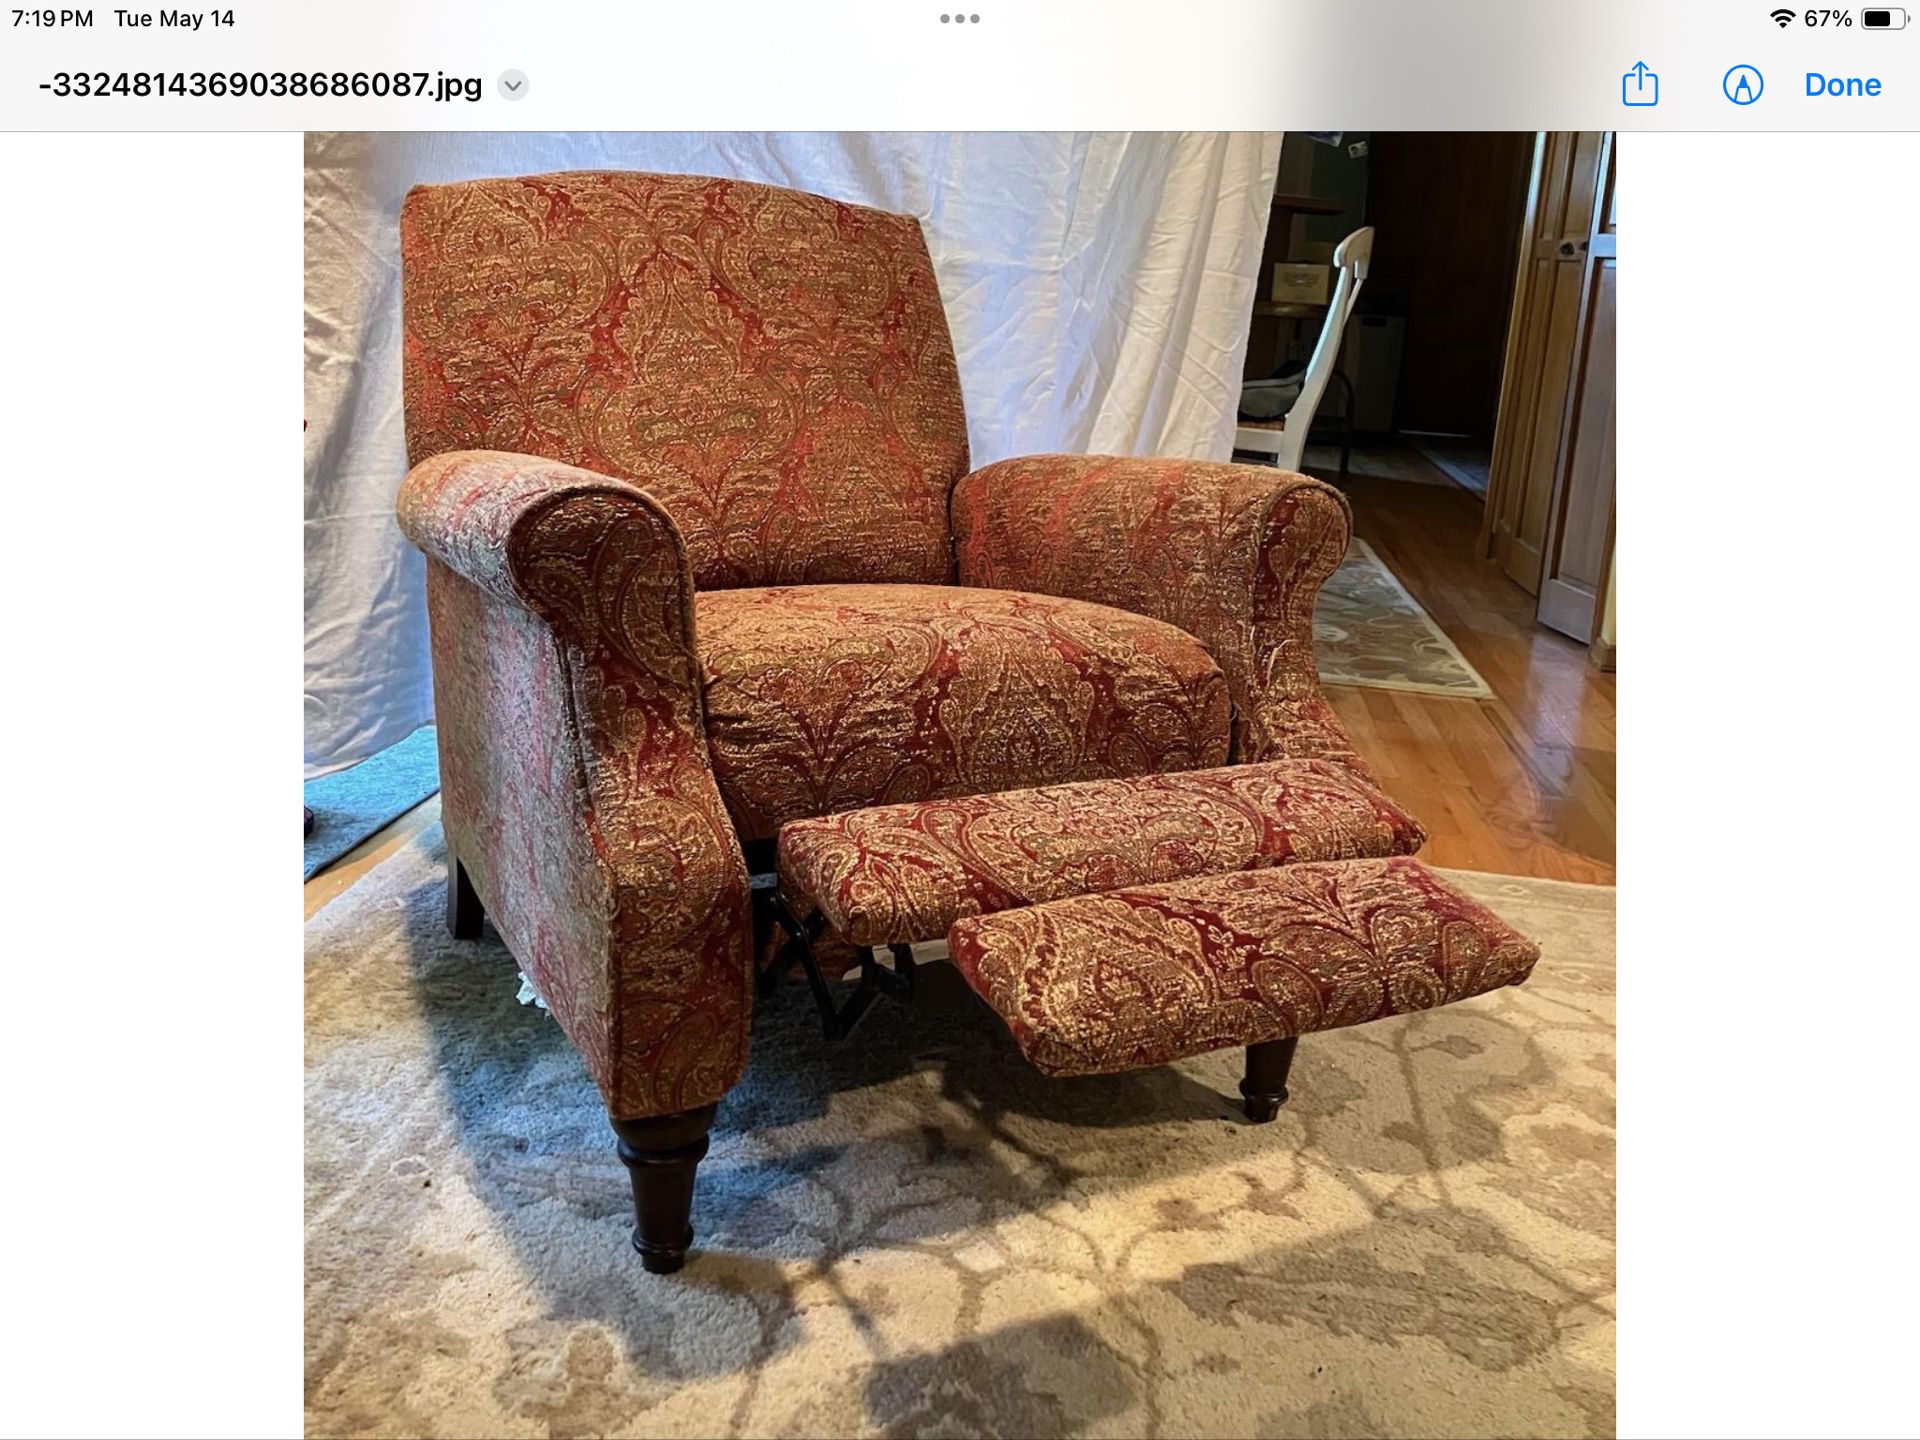 FREE 2 CHAIRS RECLINING 